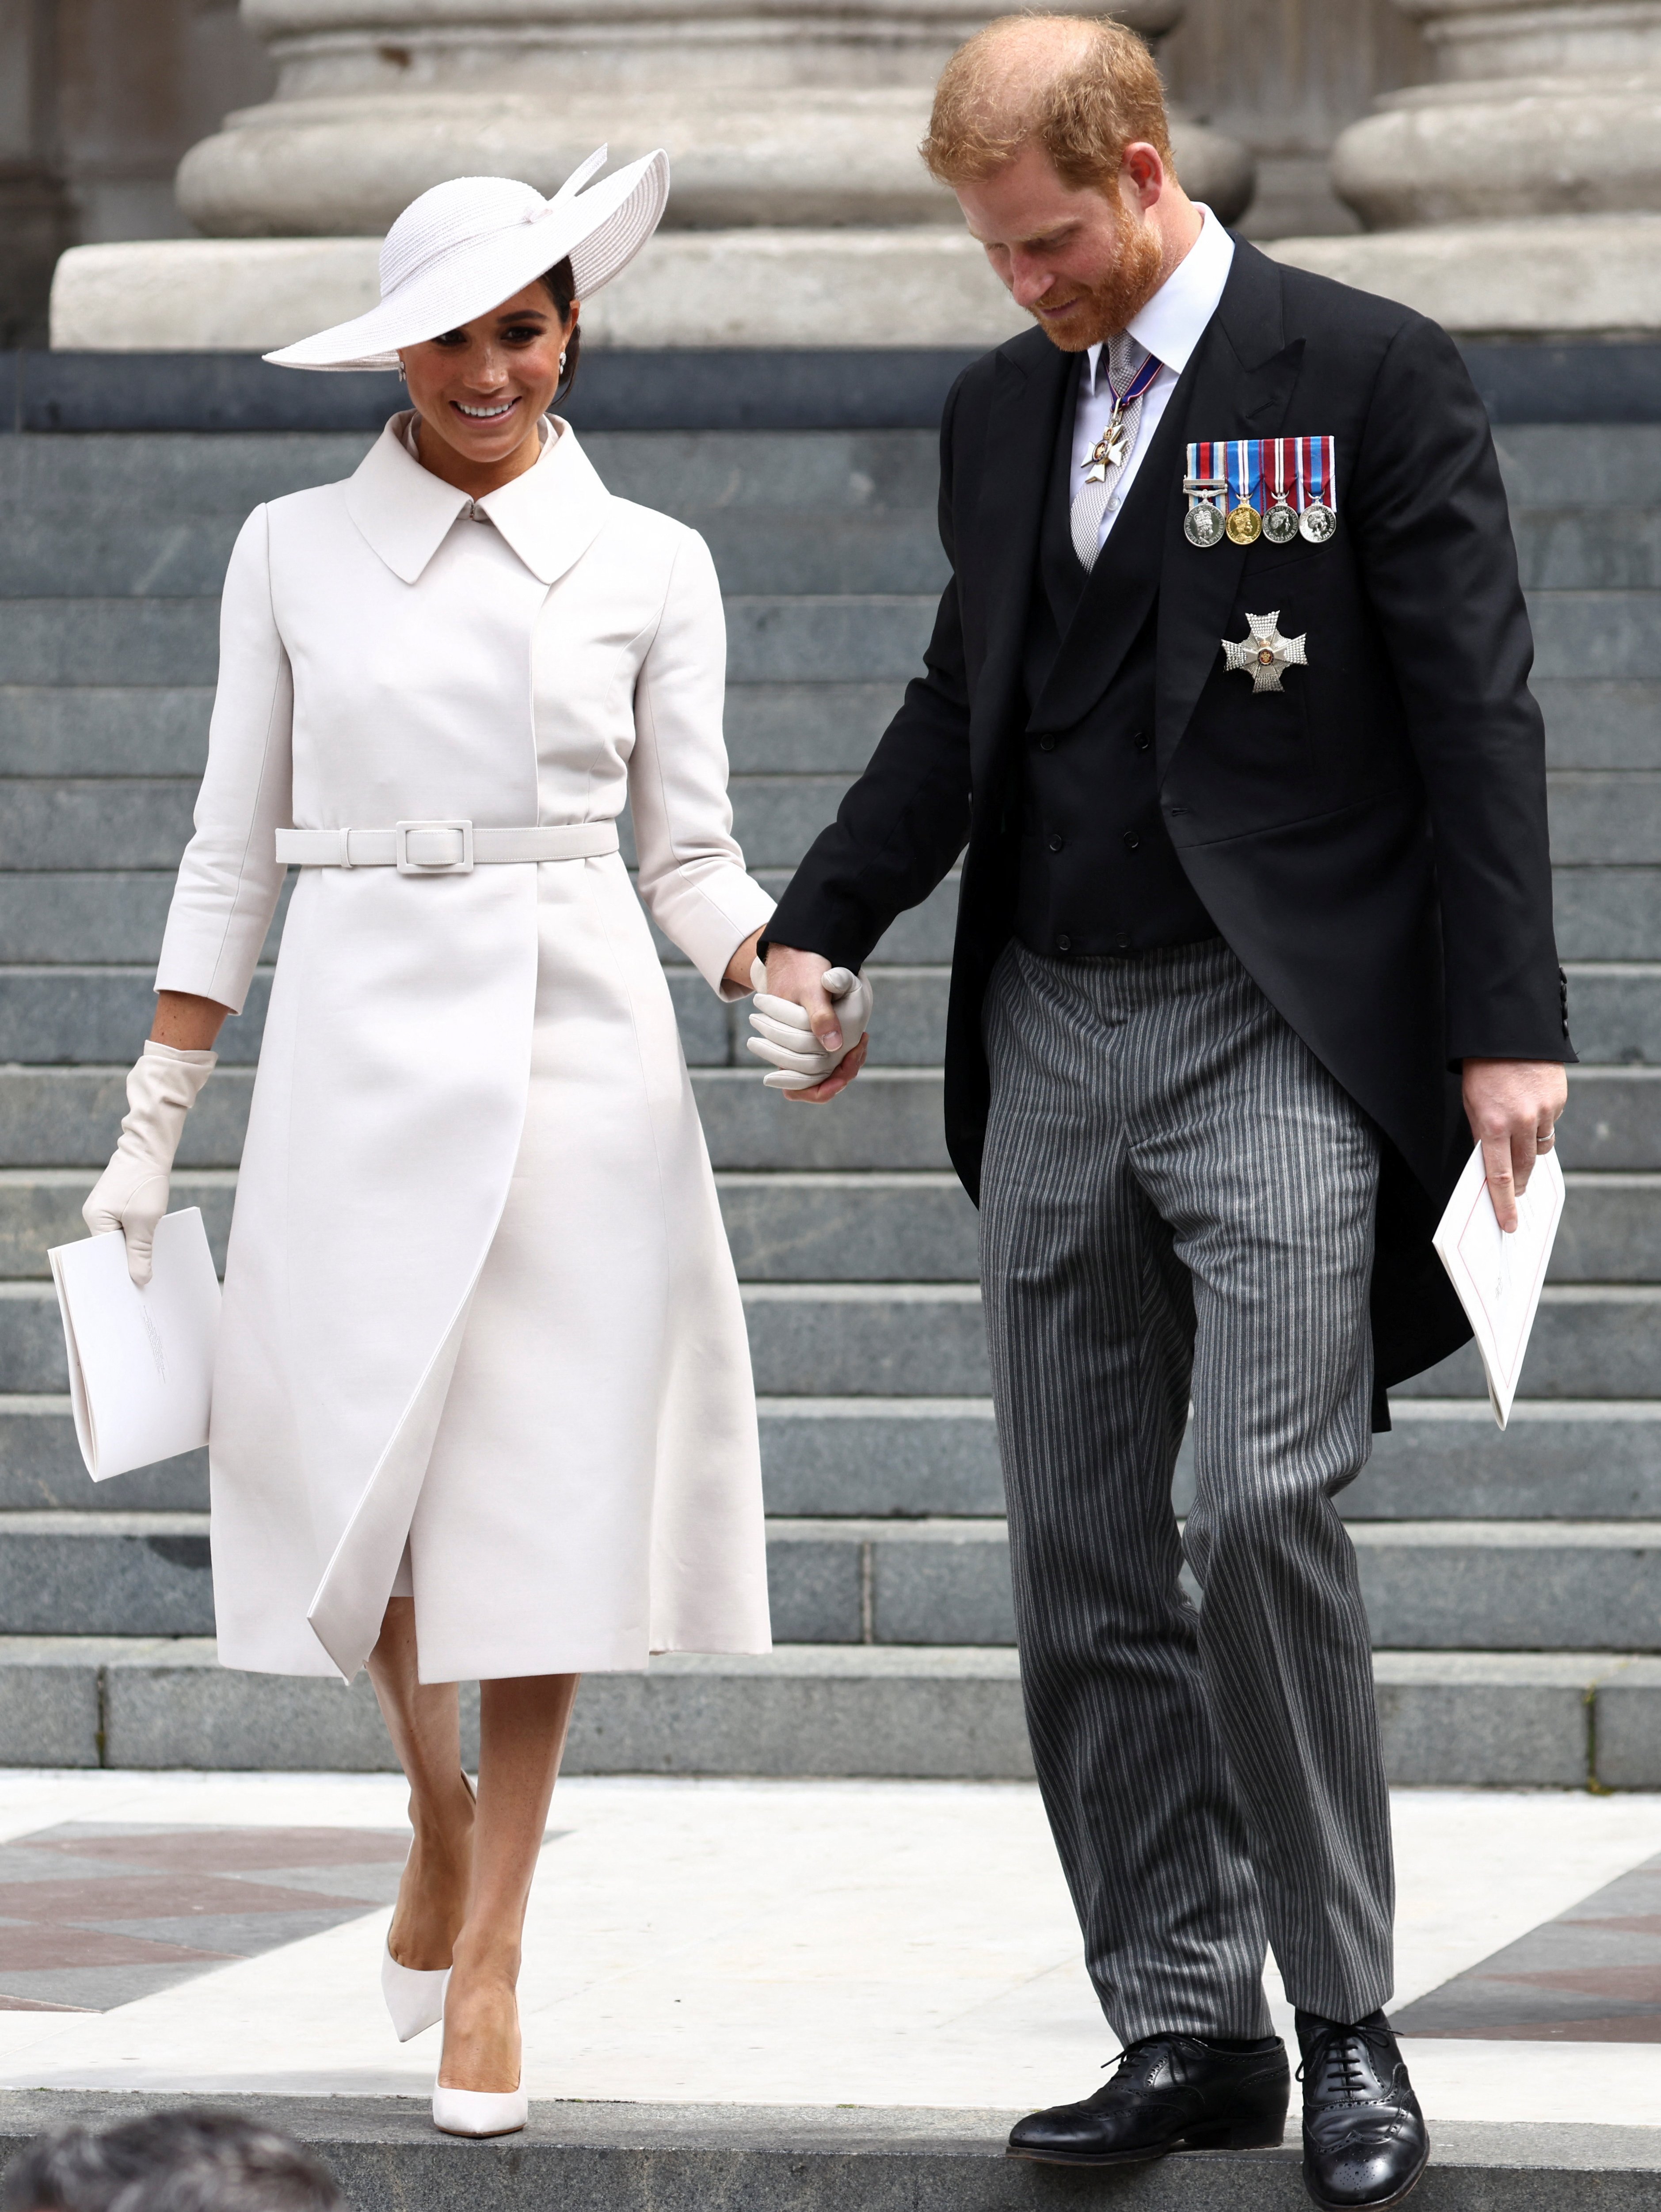 Meghan Markle, Duchess of Sussex and Prince Harry, Duke of Sussex pictured holding hands as they depart after the National Service of Thanksgiving at St Paul's Cathedral on June 3, 2022 in London, England. | Source: Getty Images